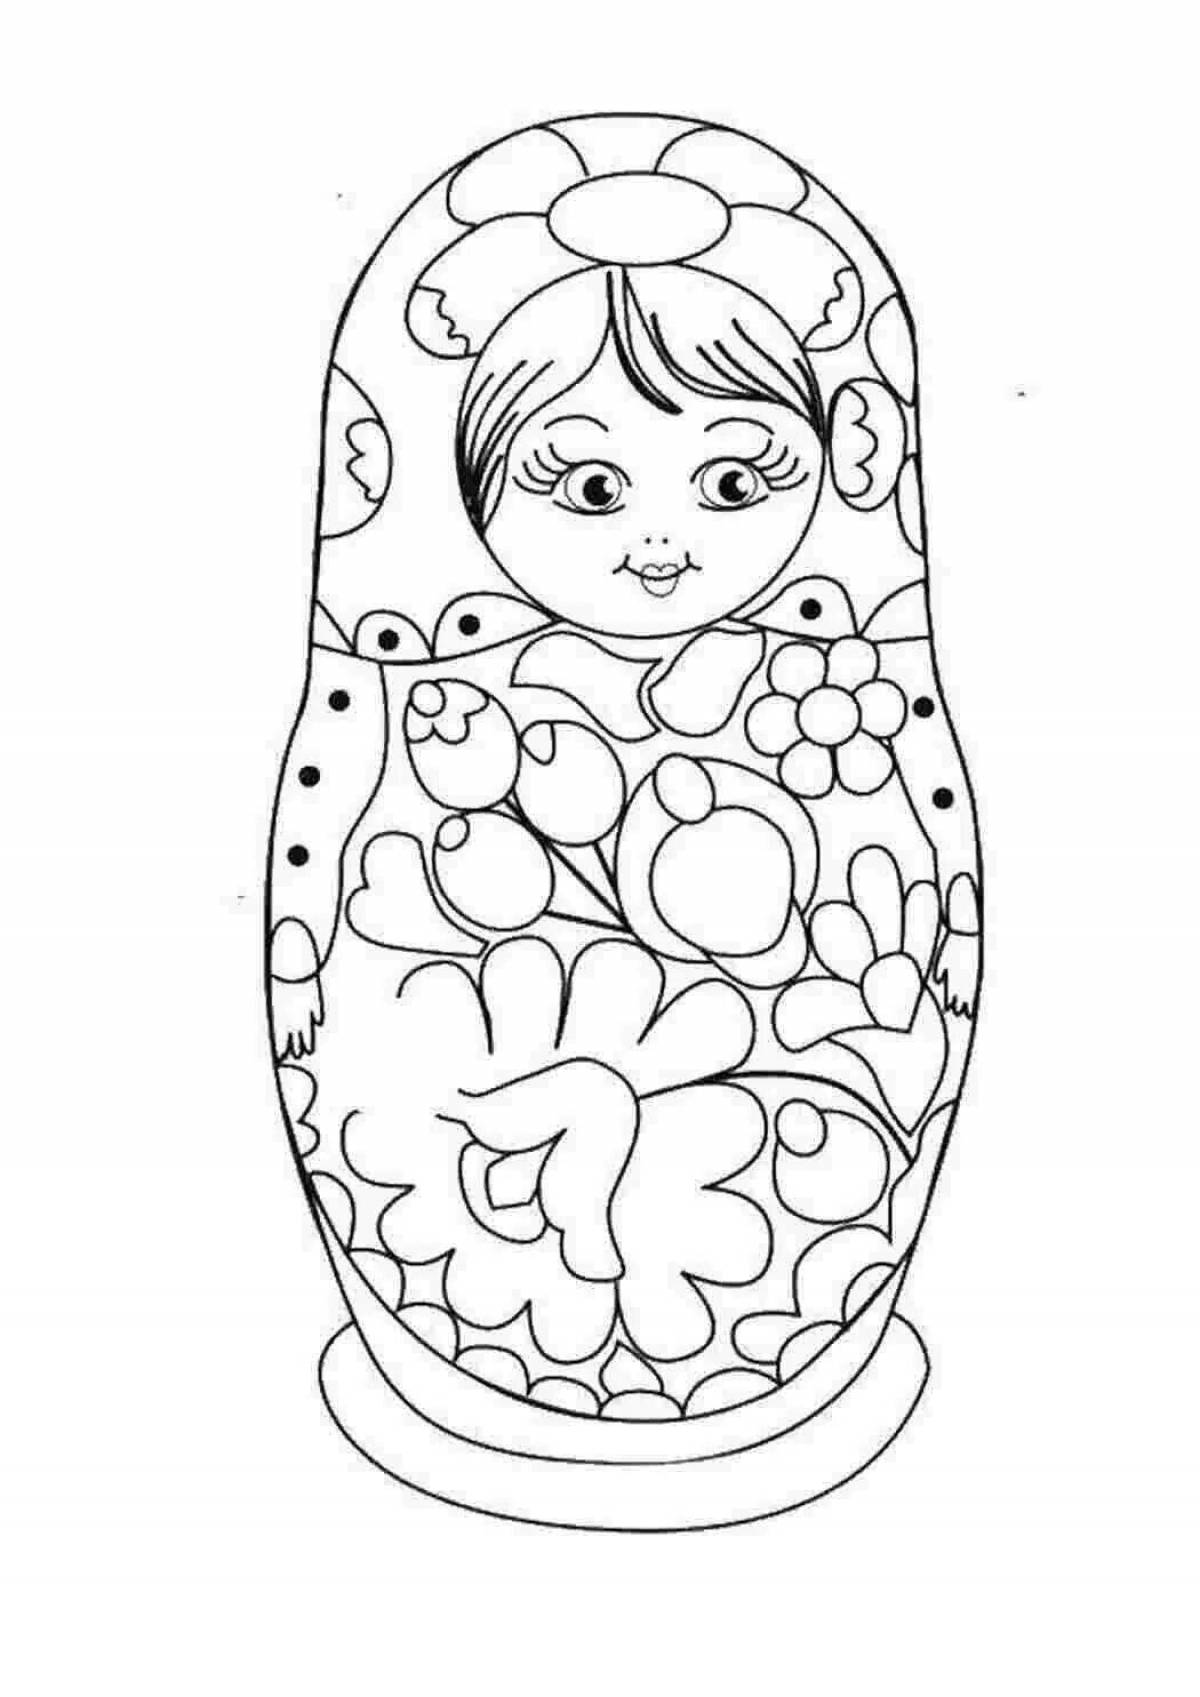 Fun coloring dolls for the little ones